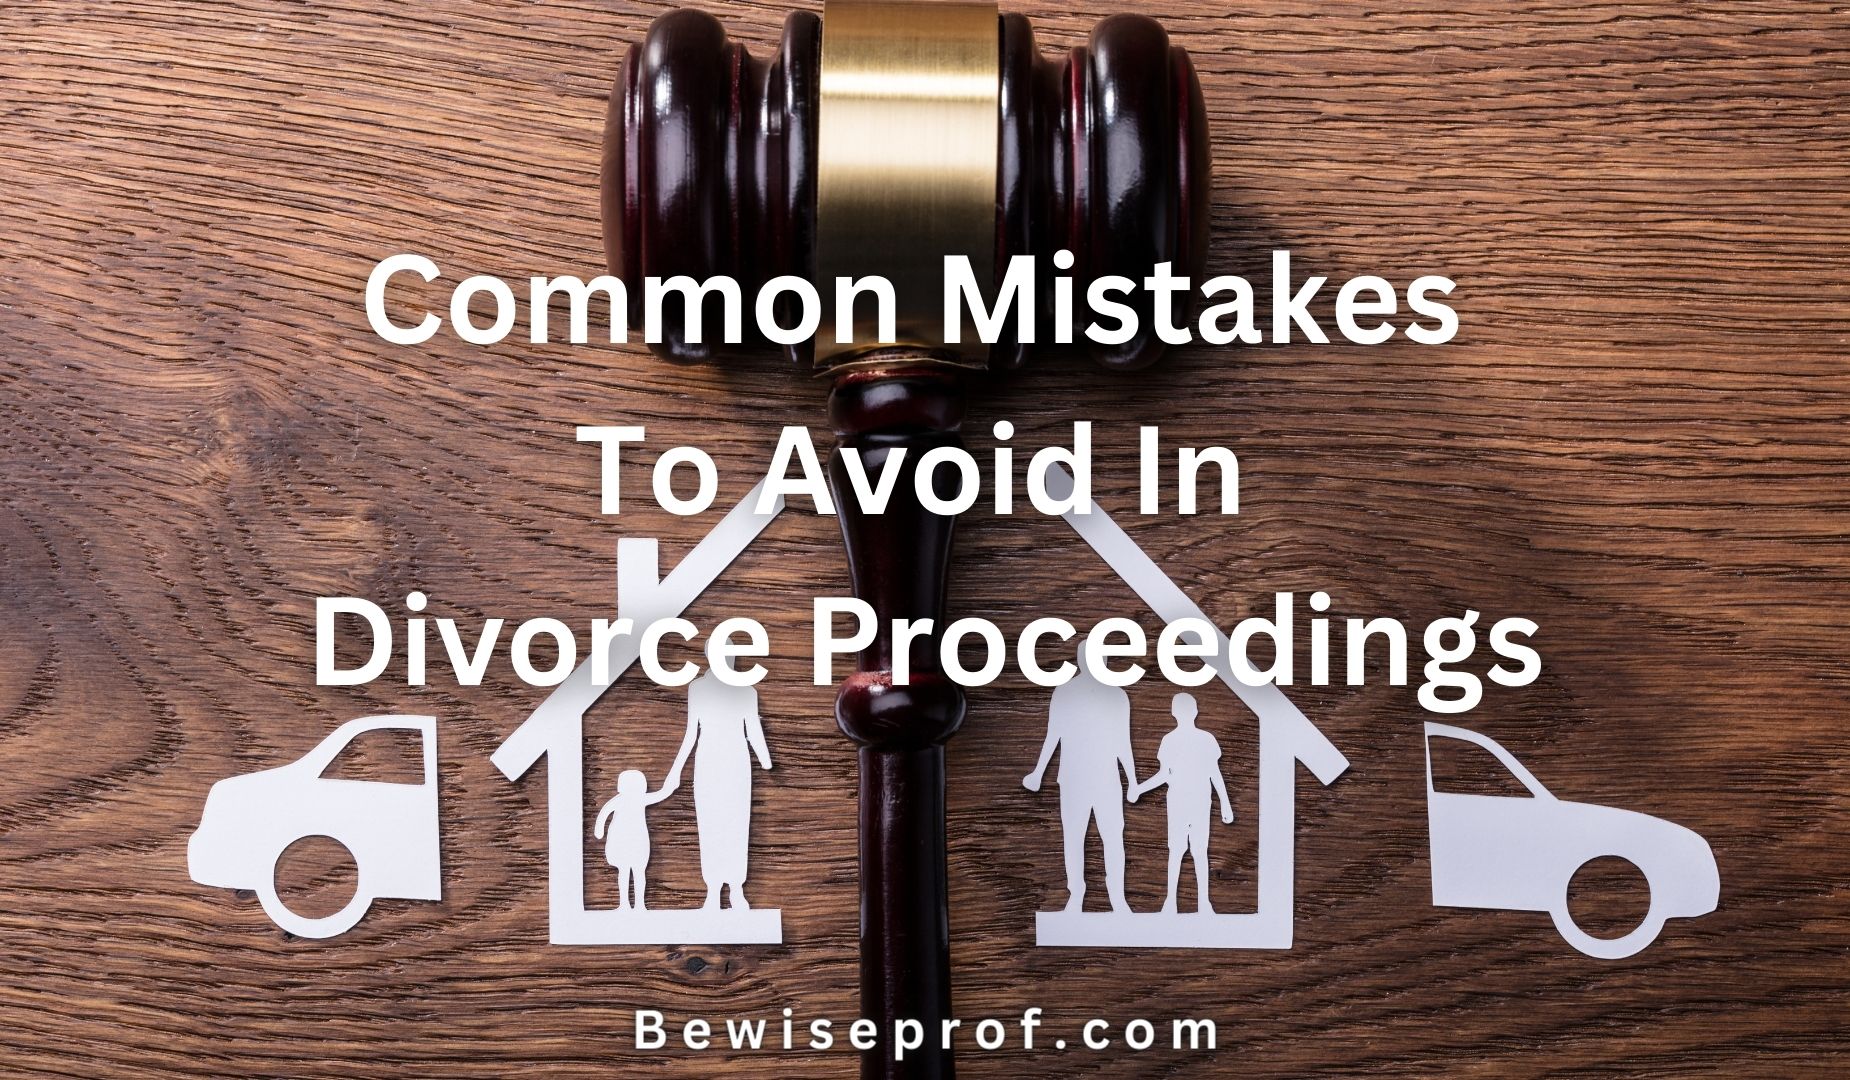 Common Mistakes To Avoid In Divorce Proceedings